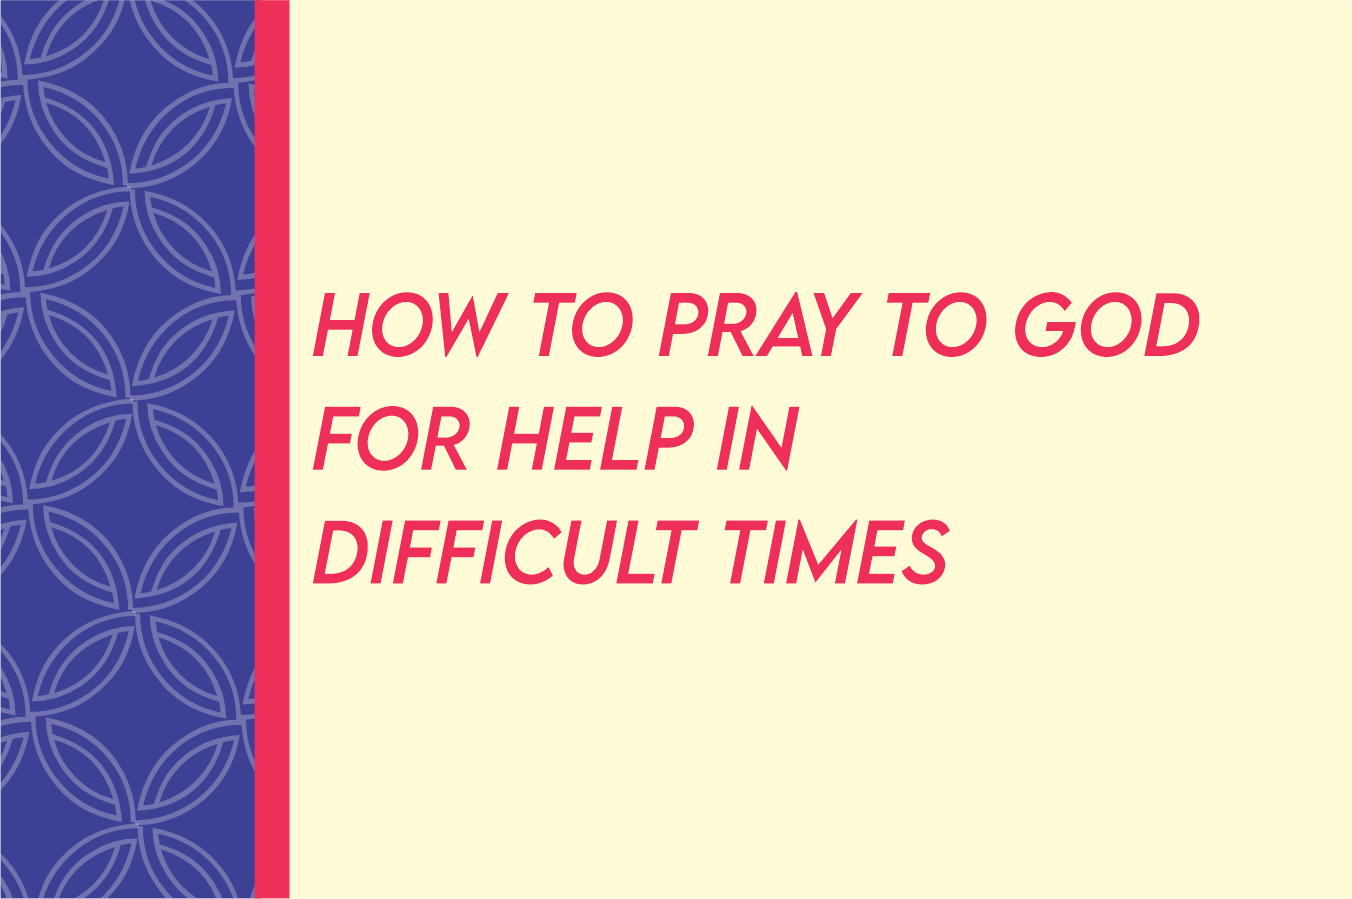 how do you pray to God for help